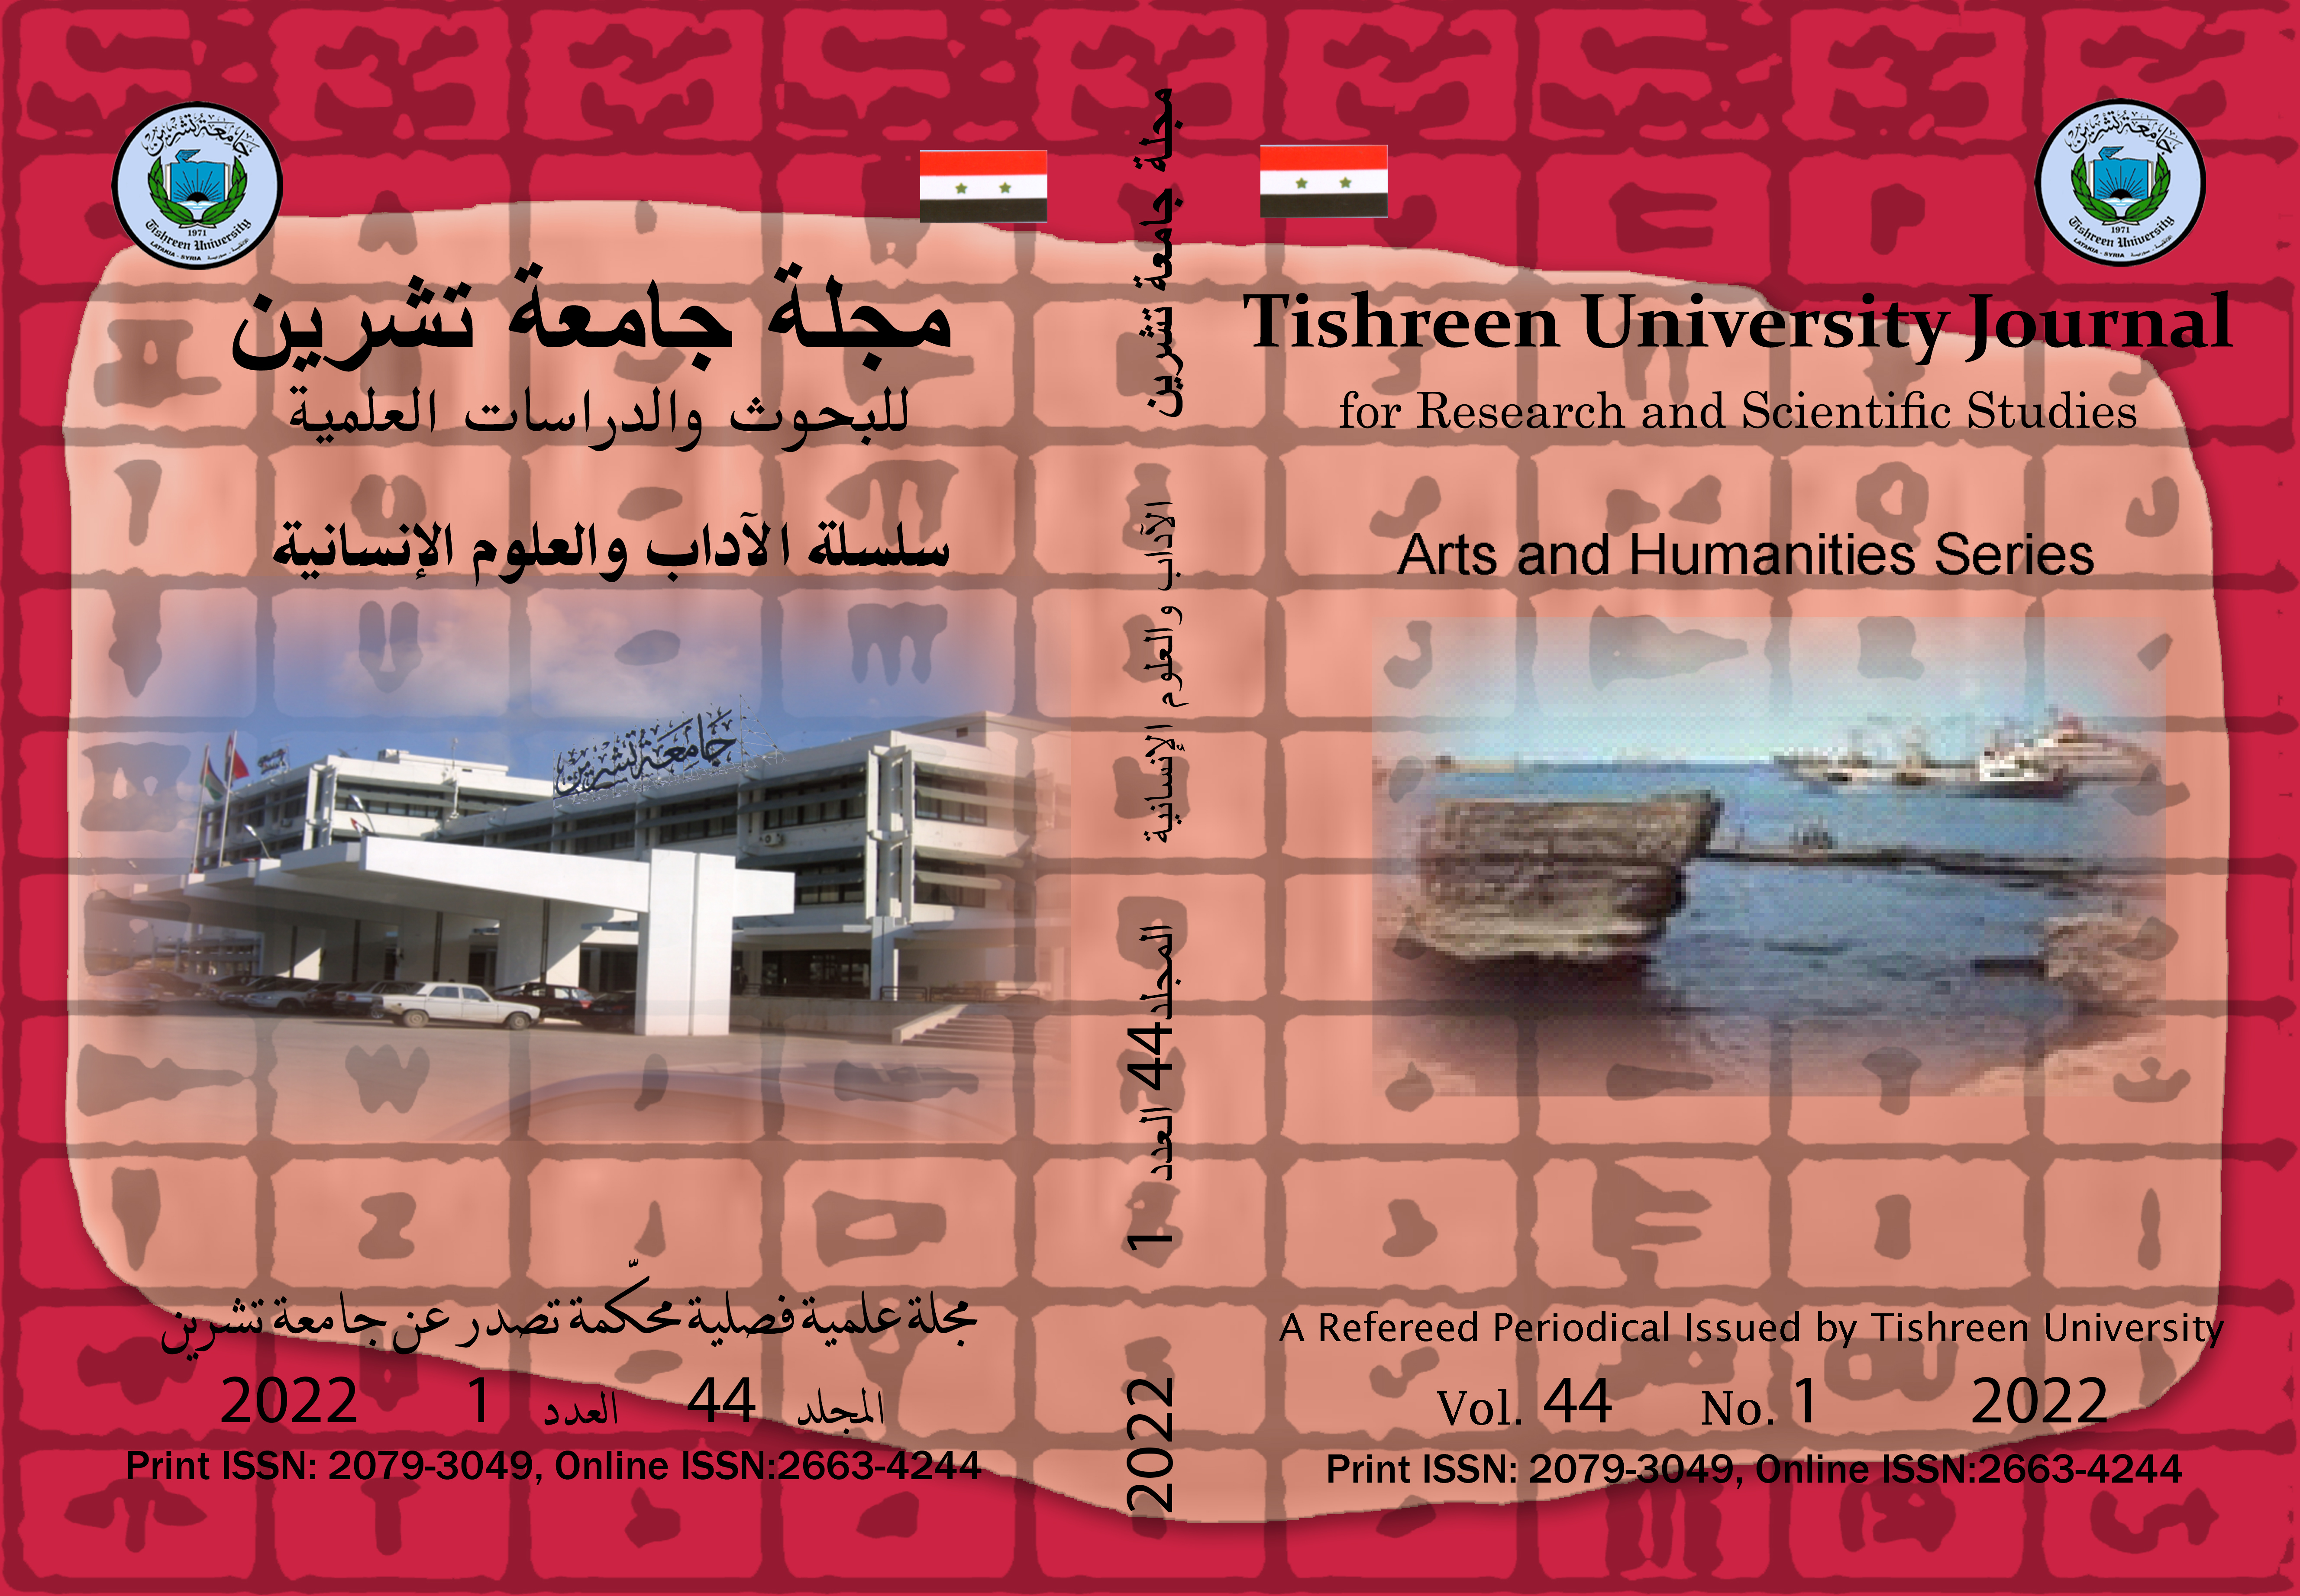 					View Vol. 44 No. 1 (2022): Tishreen University Journal for Research and Scientific Studies - Arts and Humanities
				